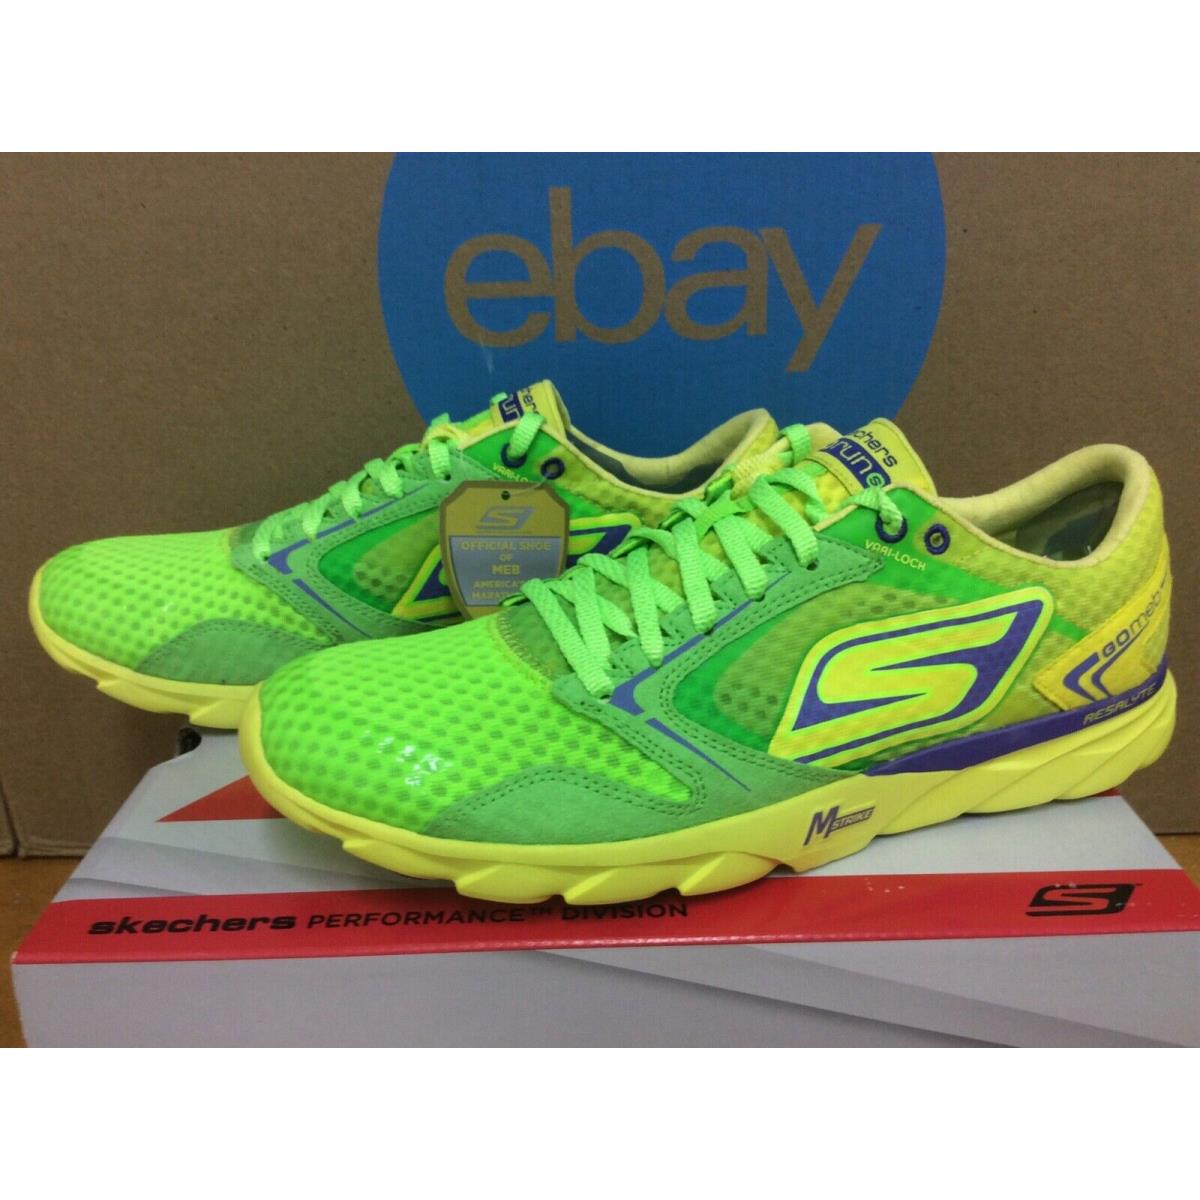 Skechers shoes Run Speed - Gray Lime 8